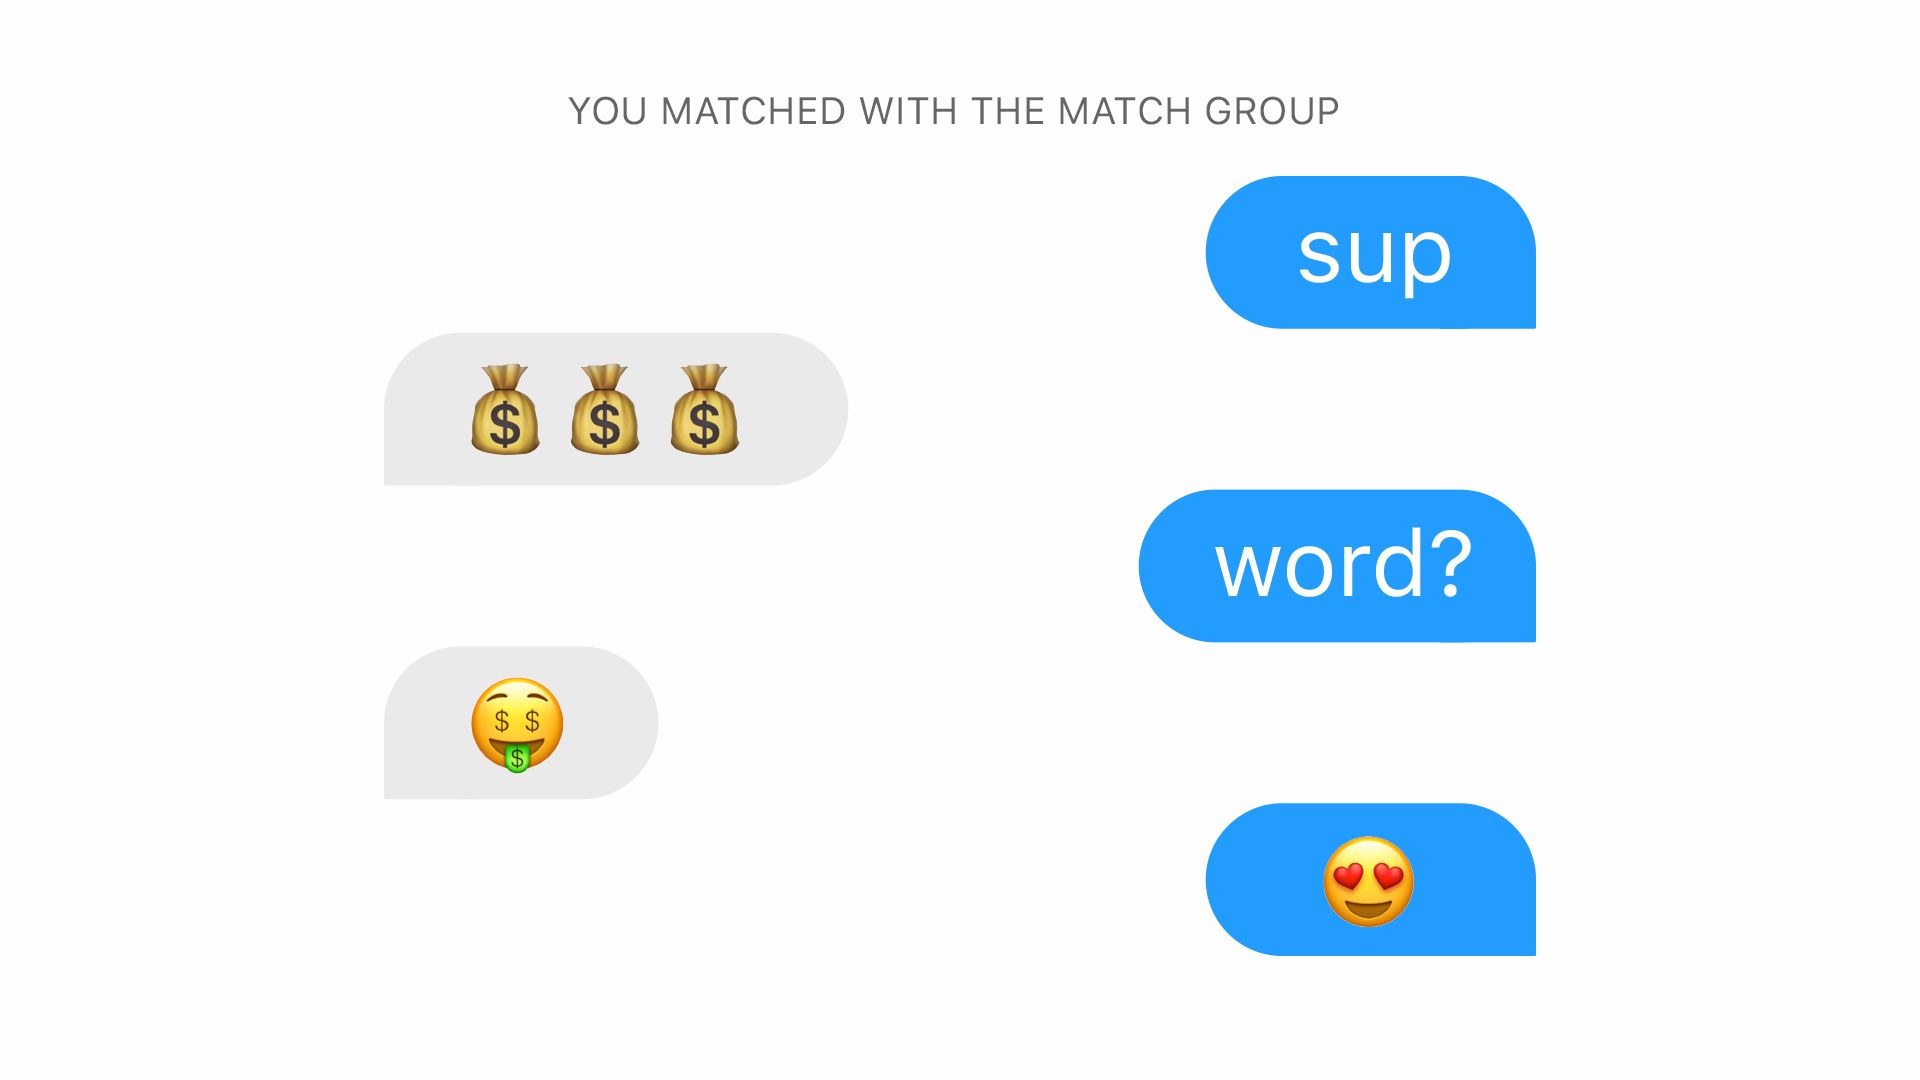 A stylized chat in the Tinder service with 'Match Group' sending money bag emojis and the other person sending heart eyed emojis.